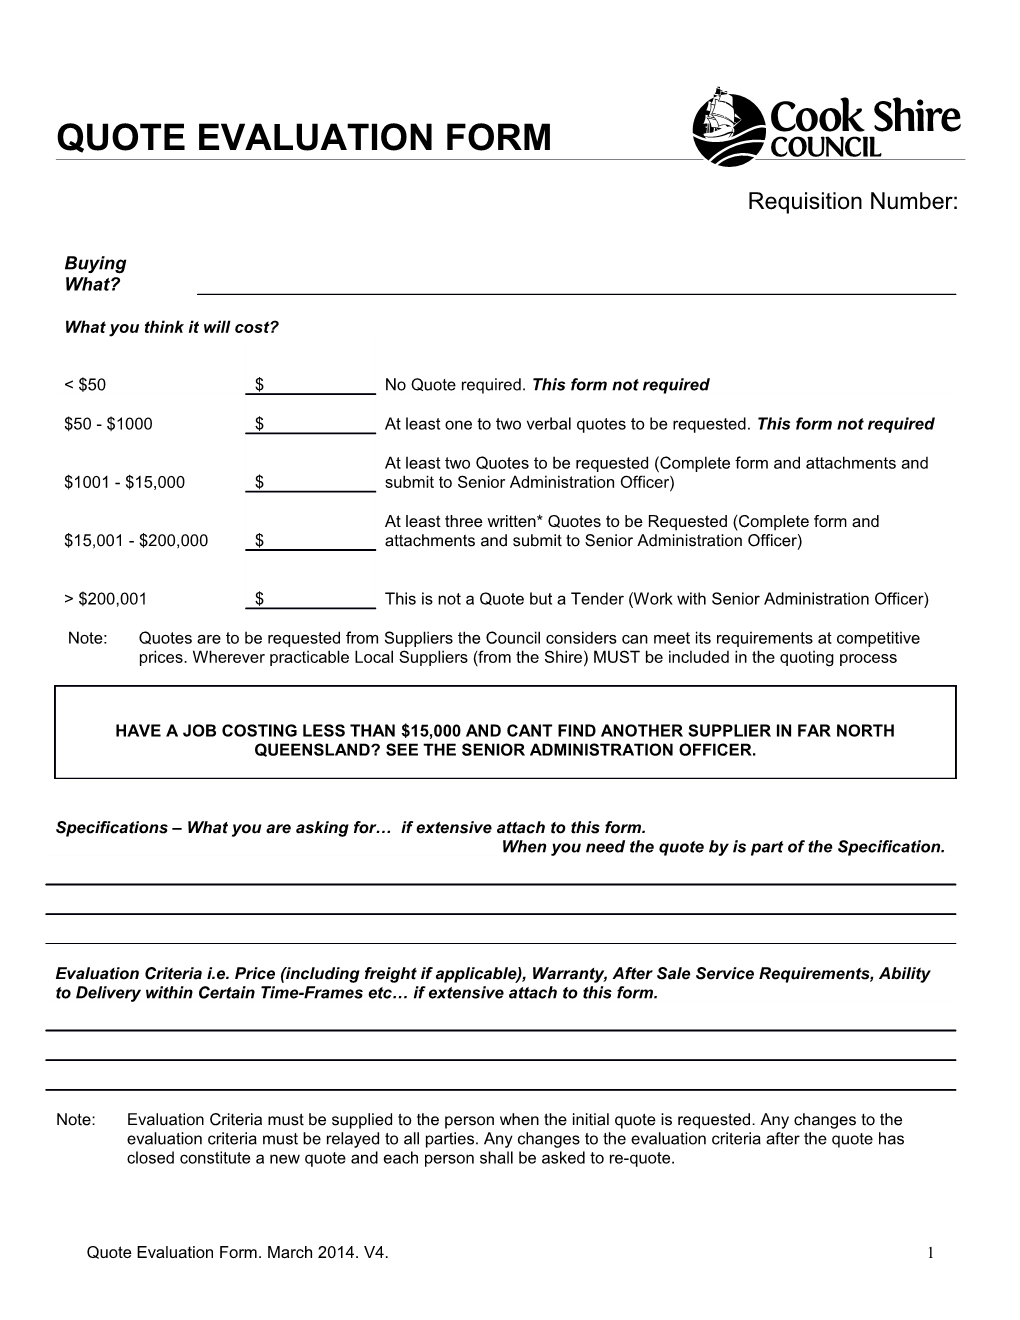 Quote Evaluation Form